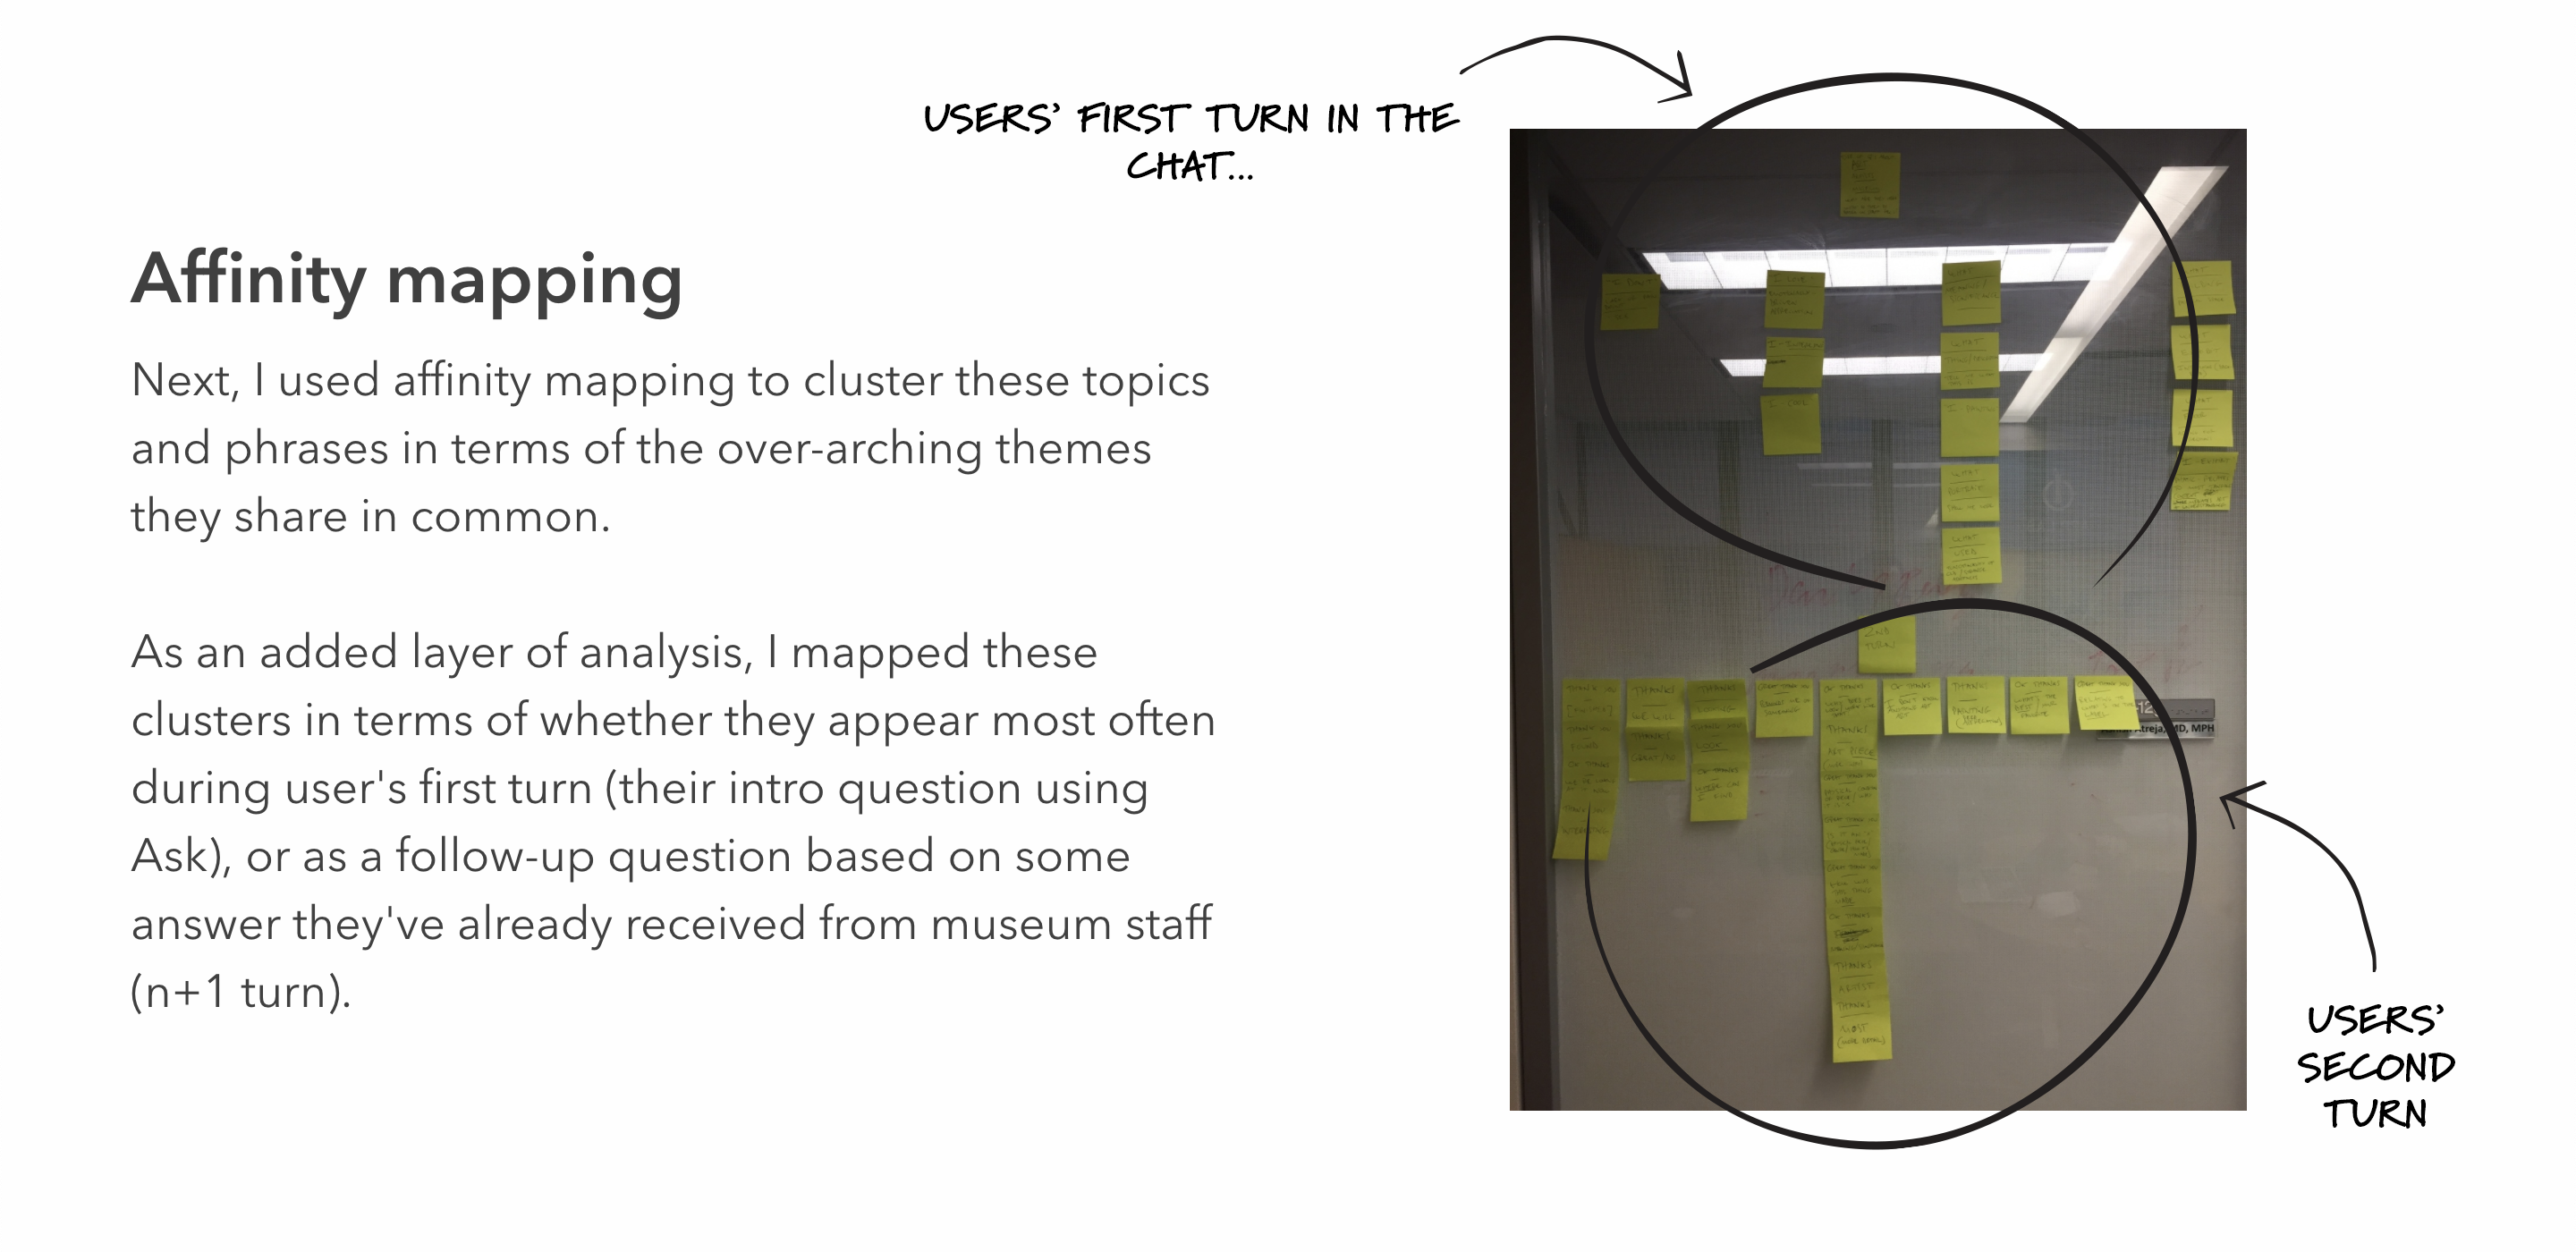 affinity mapping the results of qualitative and quantitative user research to uncover insights